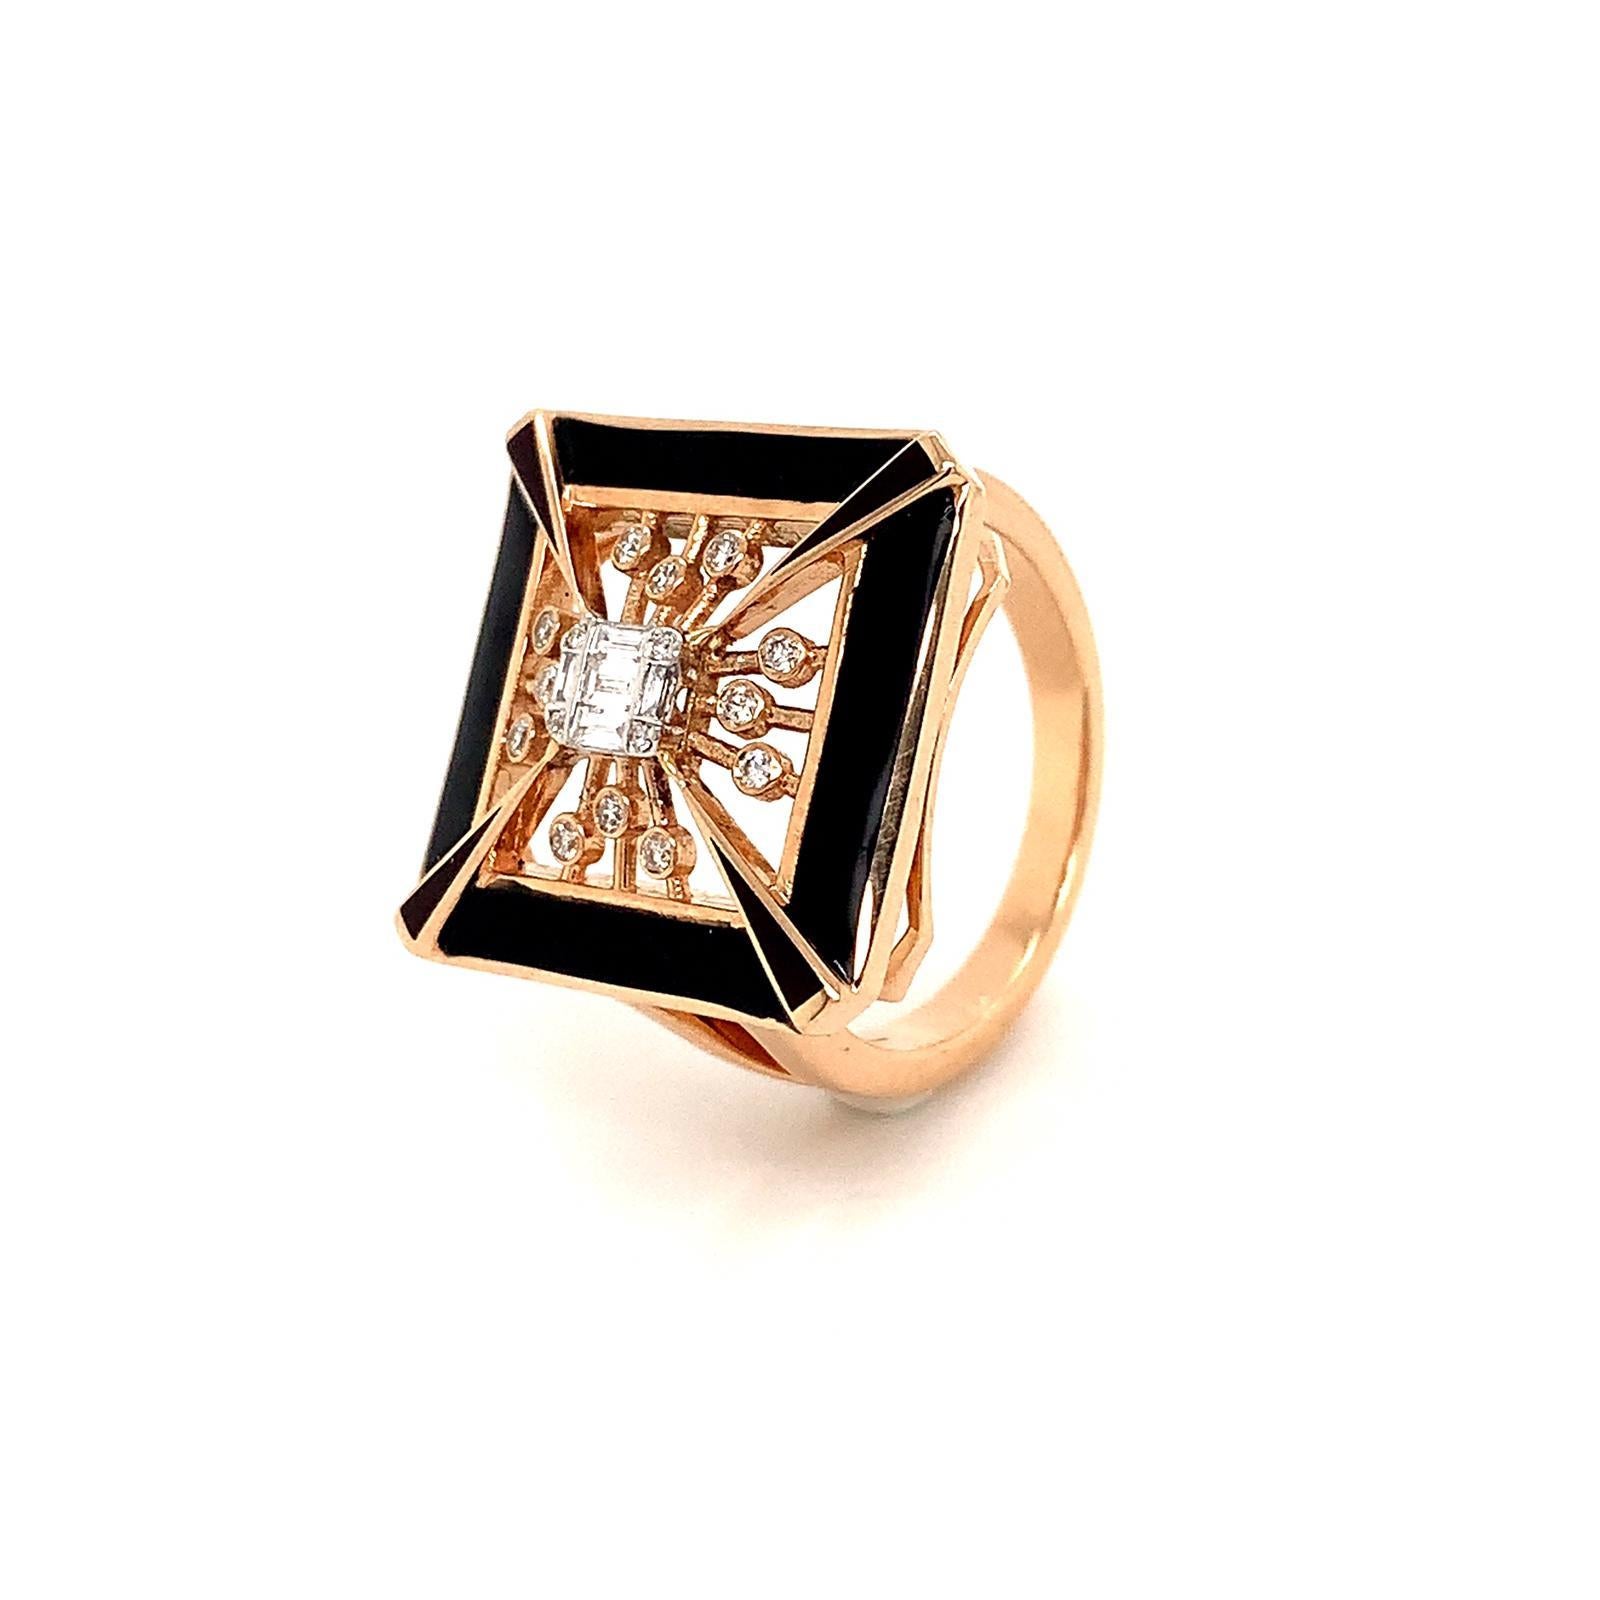 OWN Your Story 14K Rose Gold Illusion Baguette Diamond and Enamel Cubist Ring In New Condition For Sale In New Orleans, LA